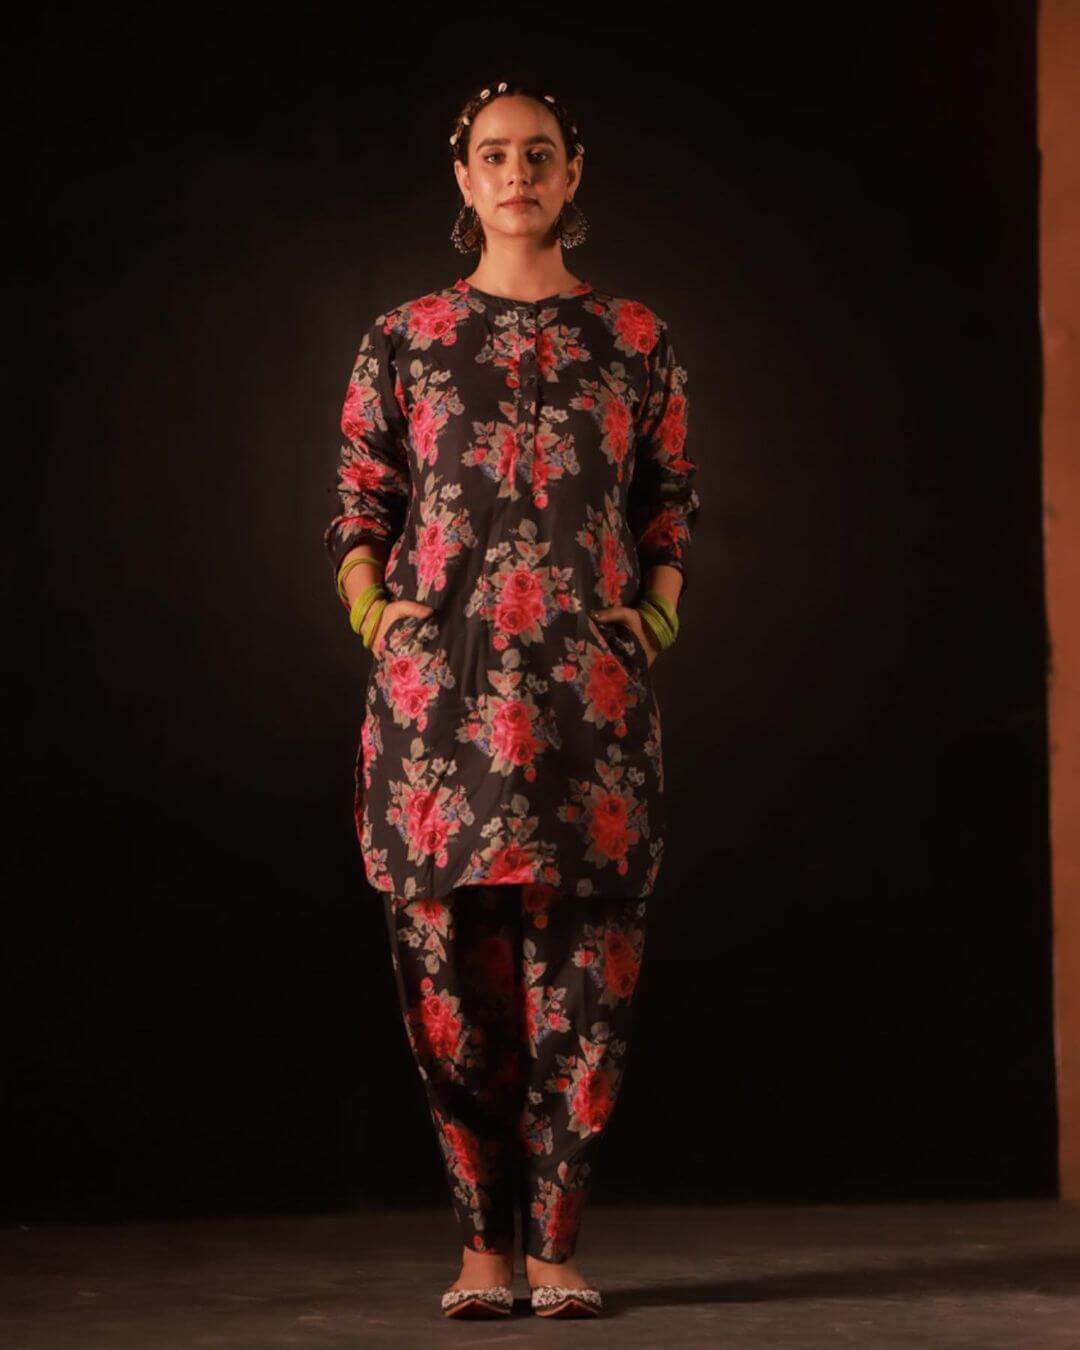 Sunanda Simple And Elegant Look In red And Green Kurta Payjama Outfit